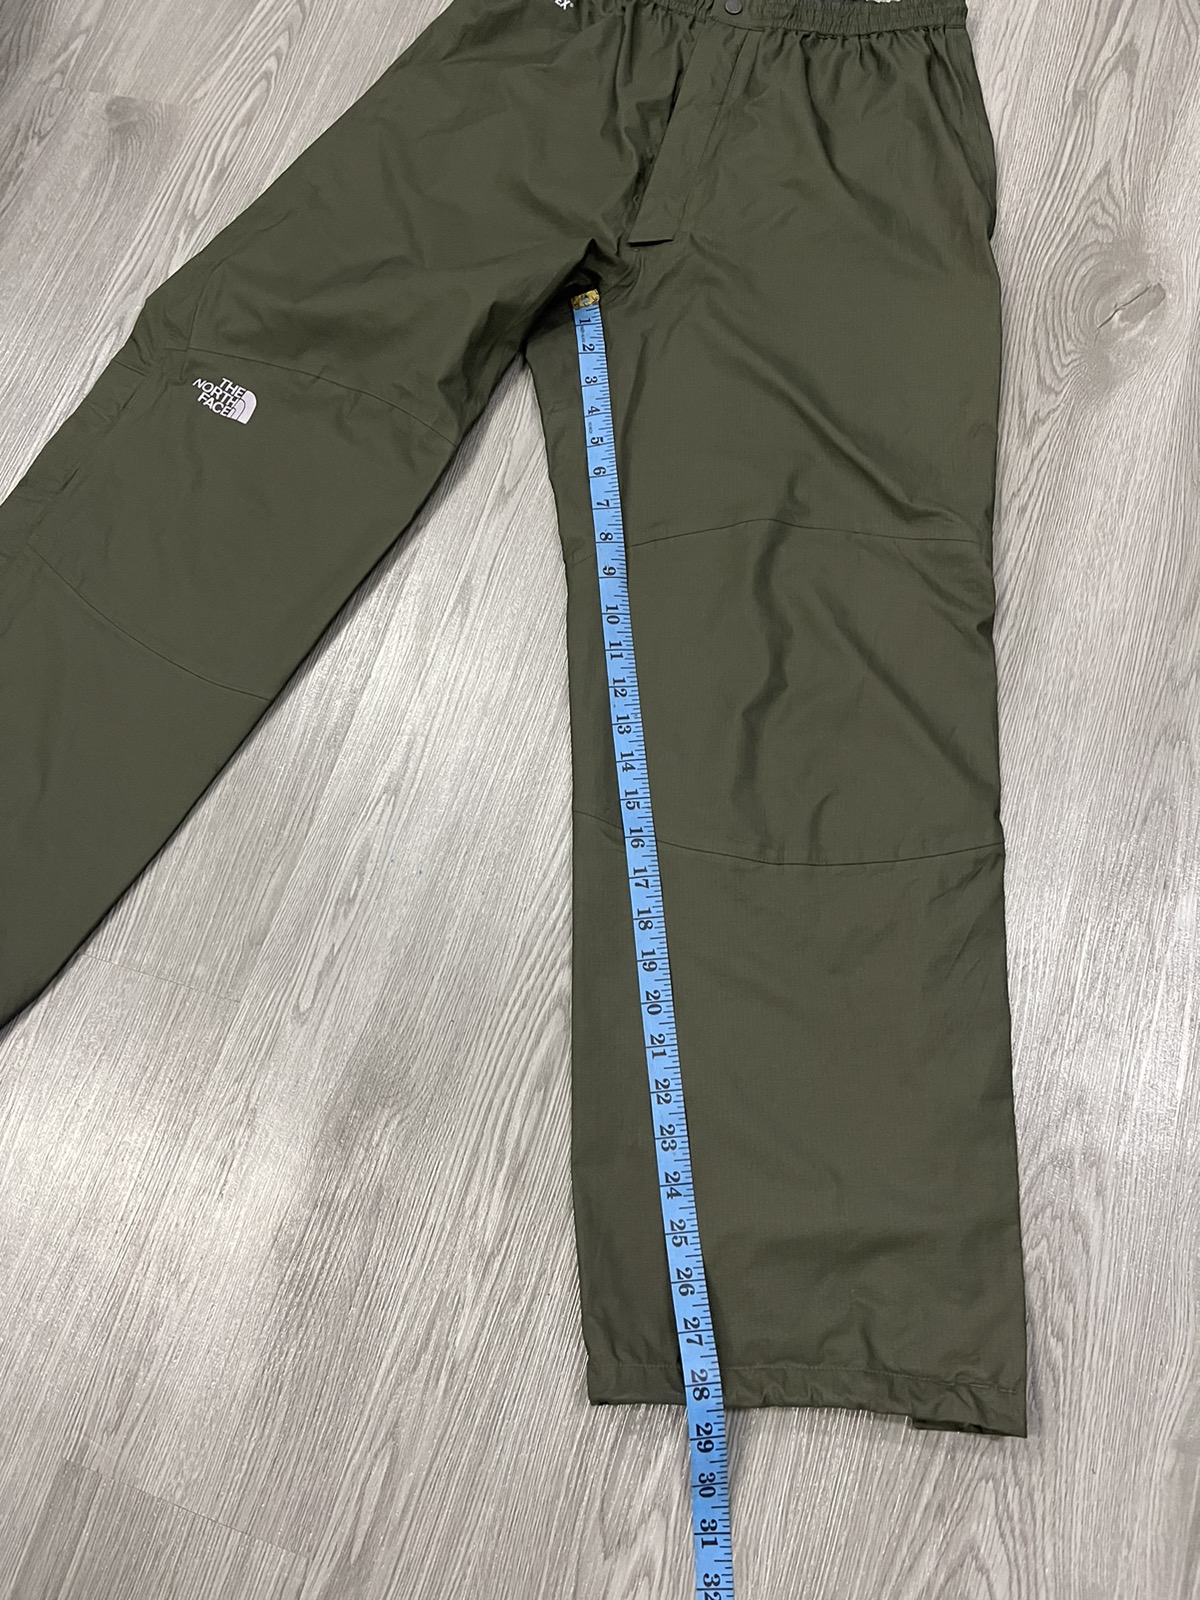 Gorpcore deal🔥The North Face Goretex pant in green - 17